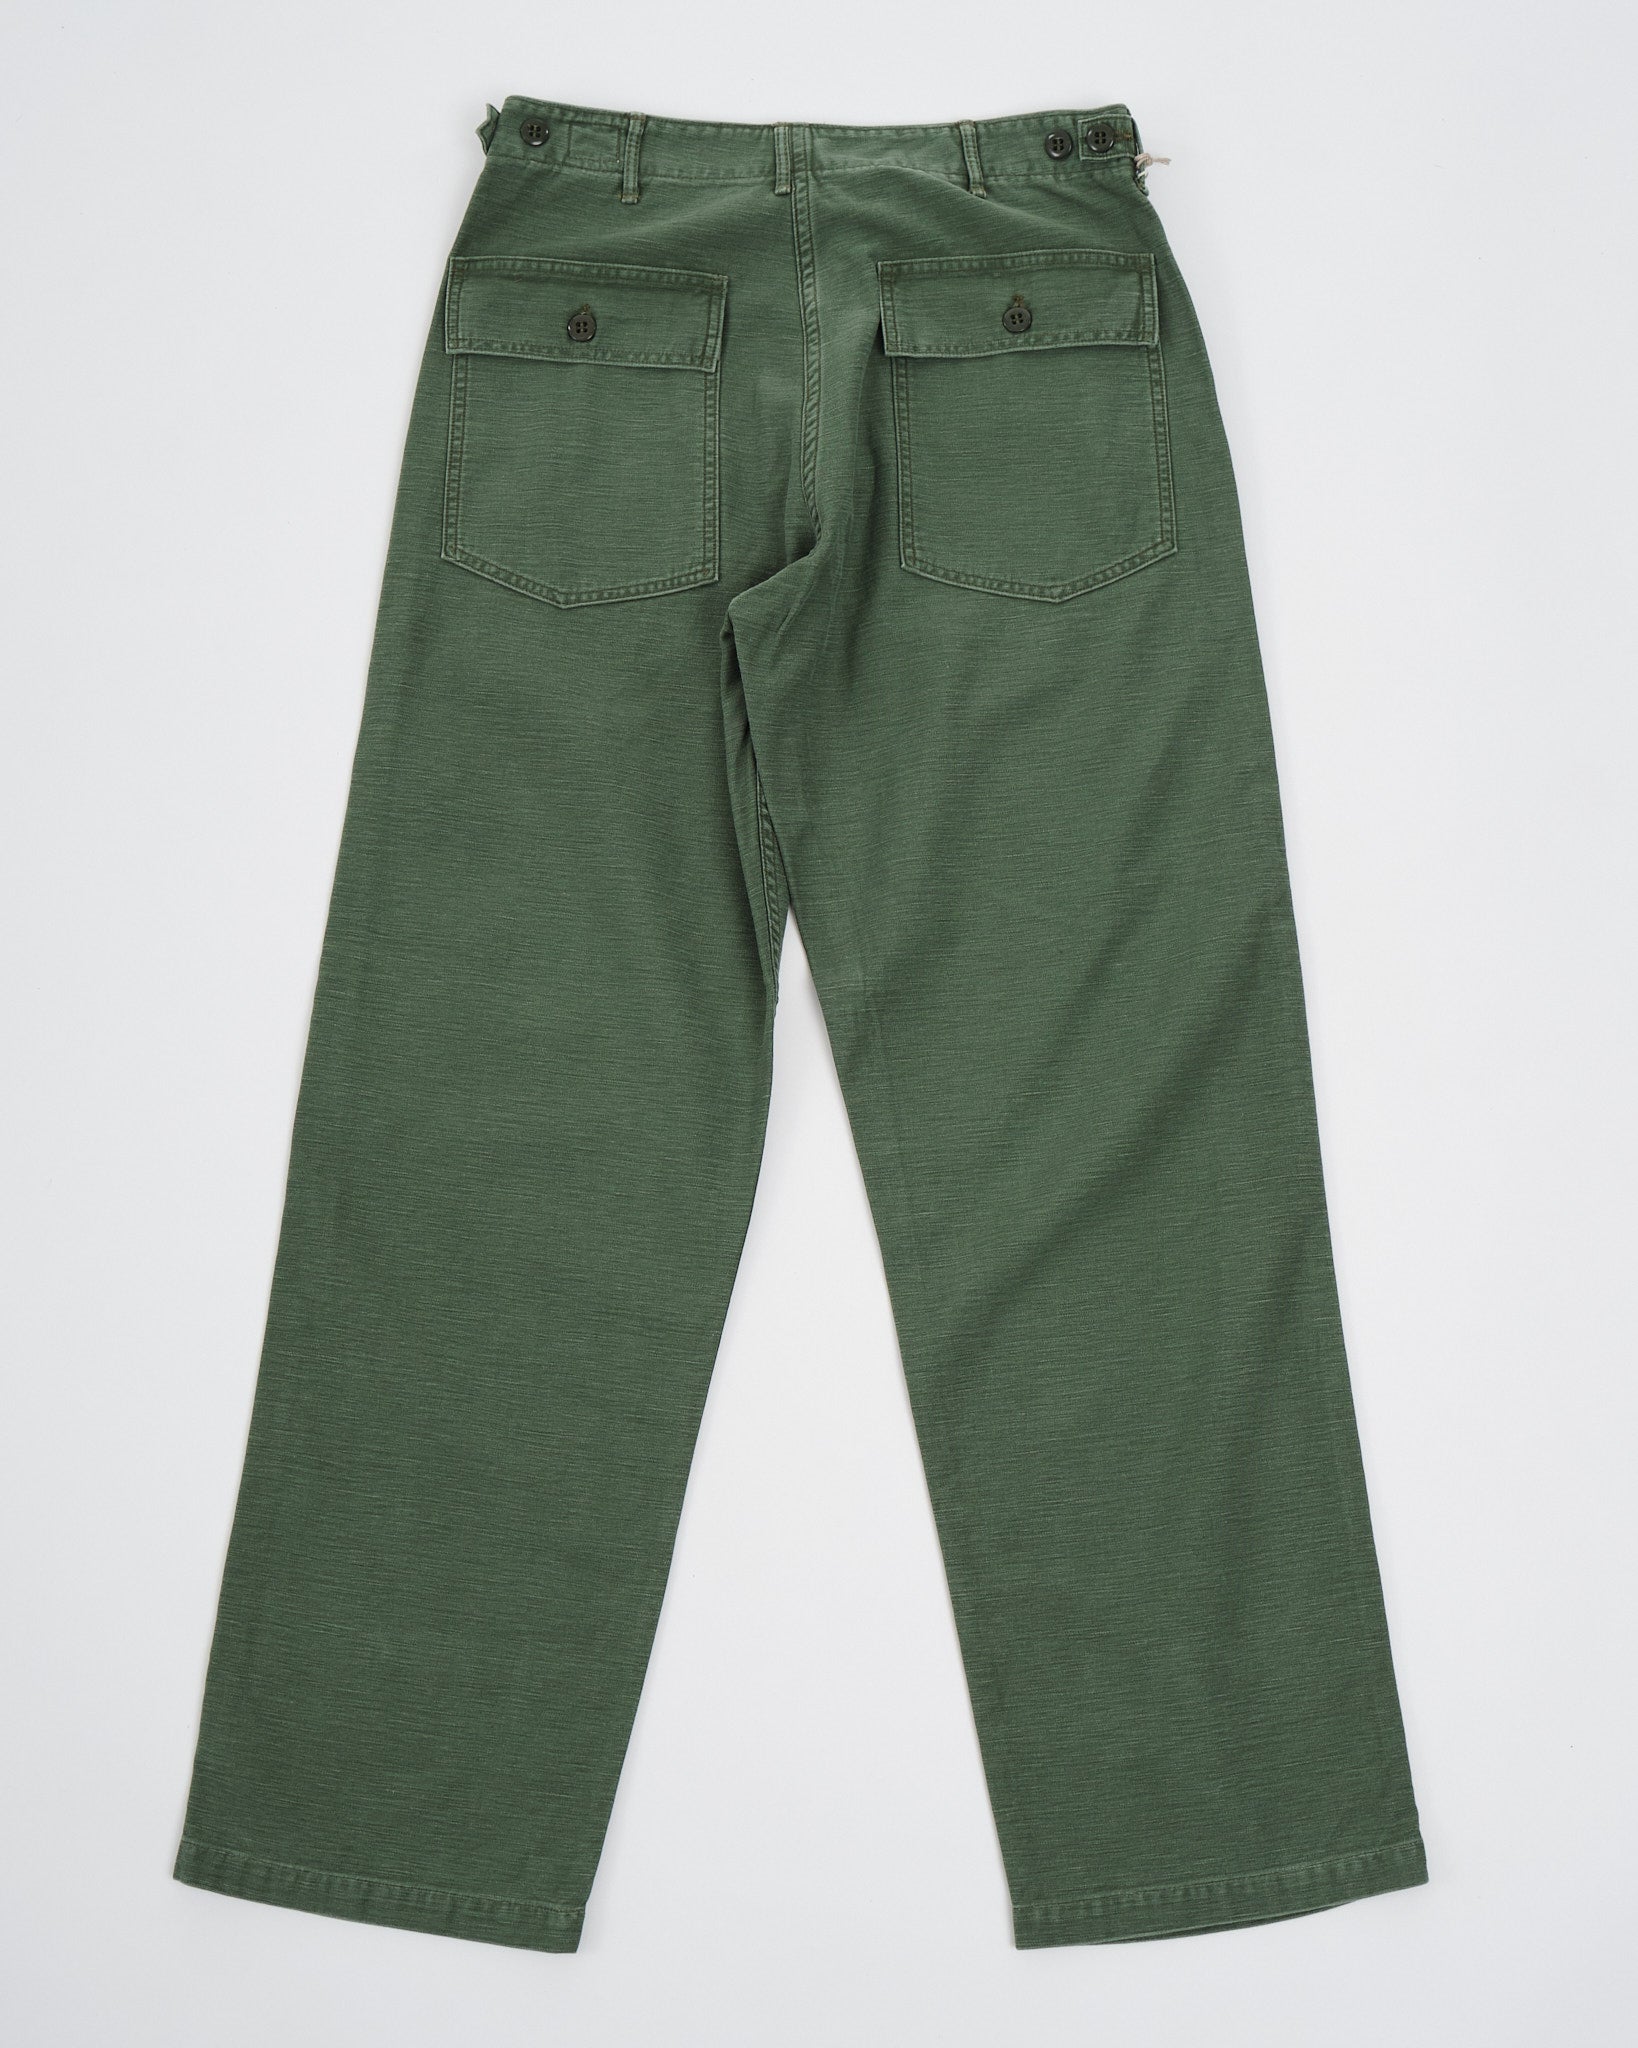 US ARMY FATIGUE PANTS GREEN USED WASH REGULAR FIT - Meadow